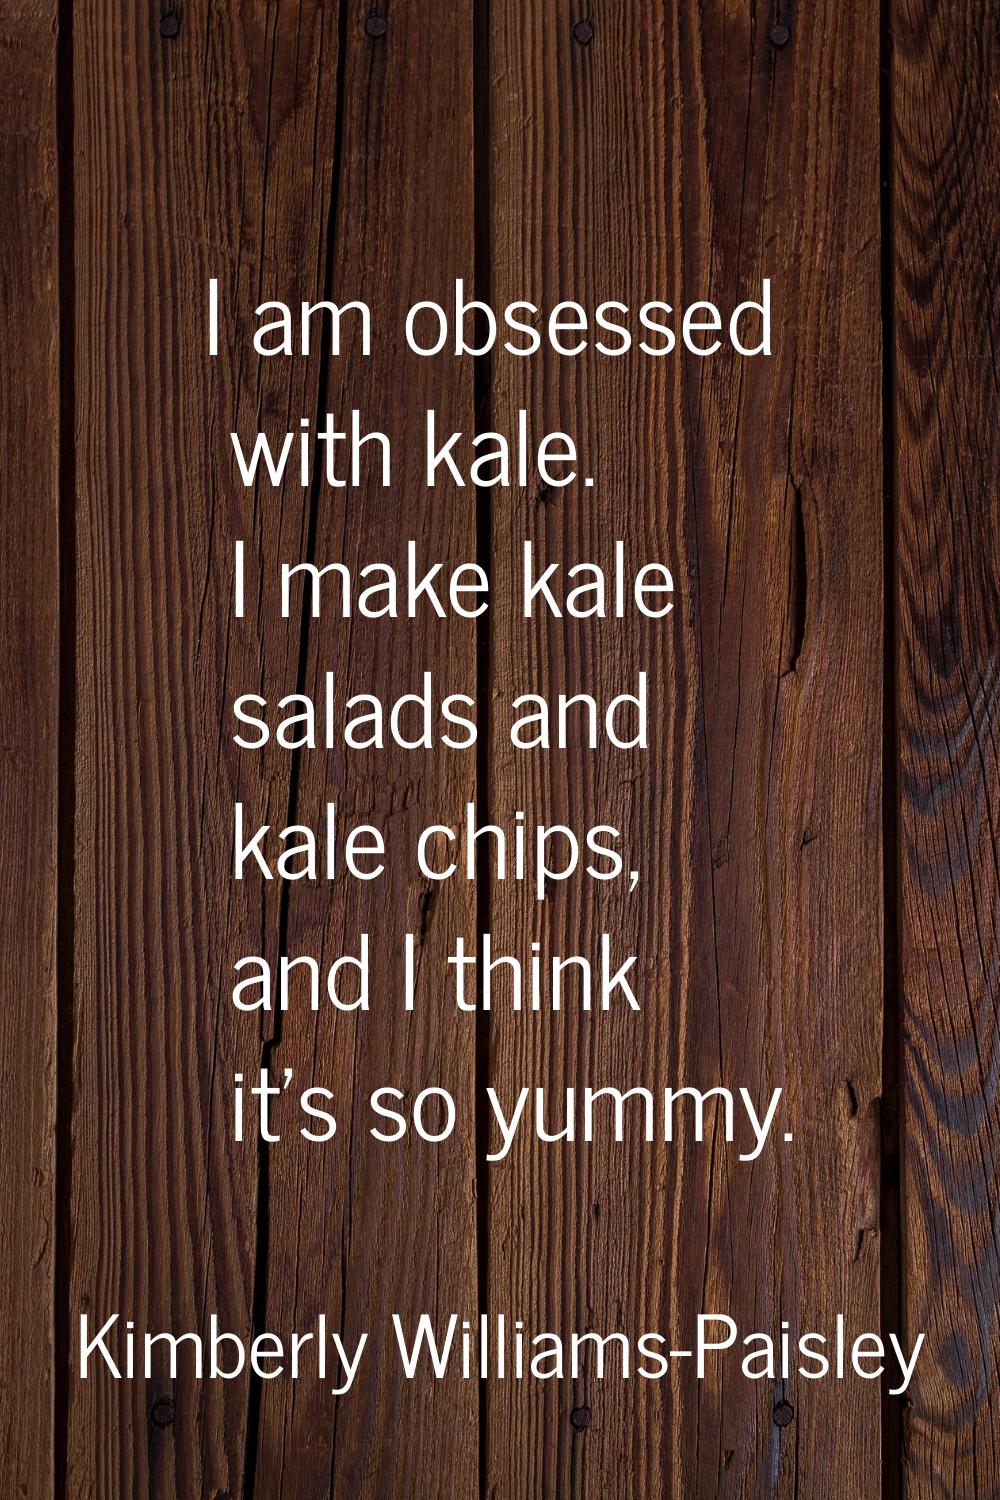 I am obsessed with kale. I make kale salads and kale chips, and I think it's so yummy.